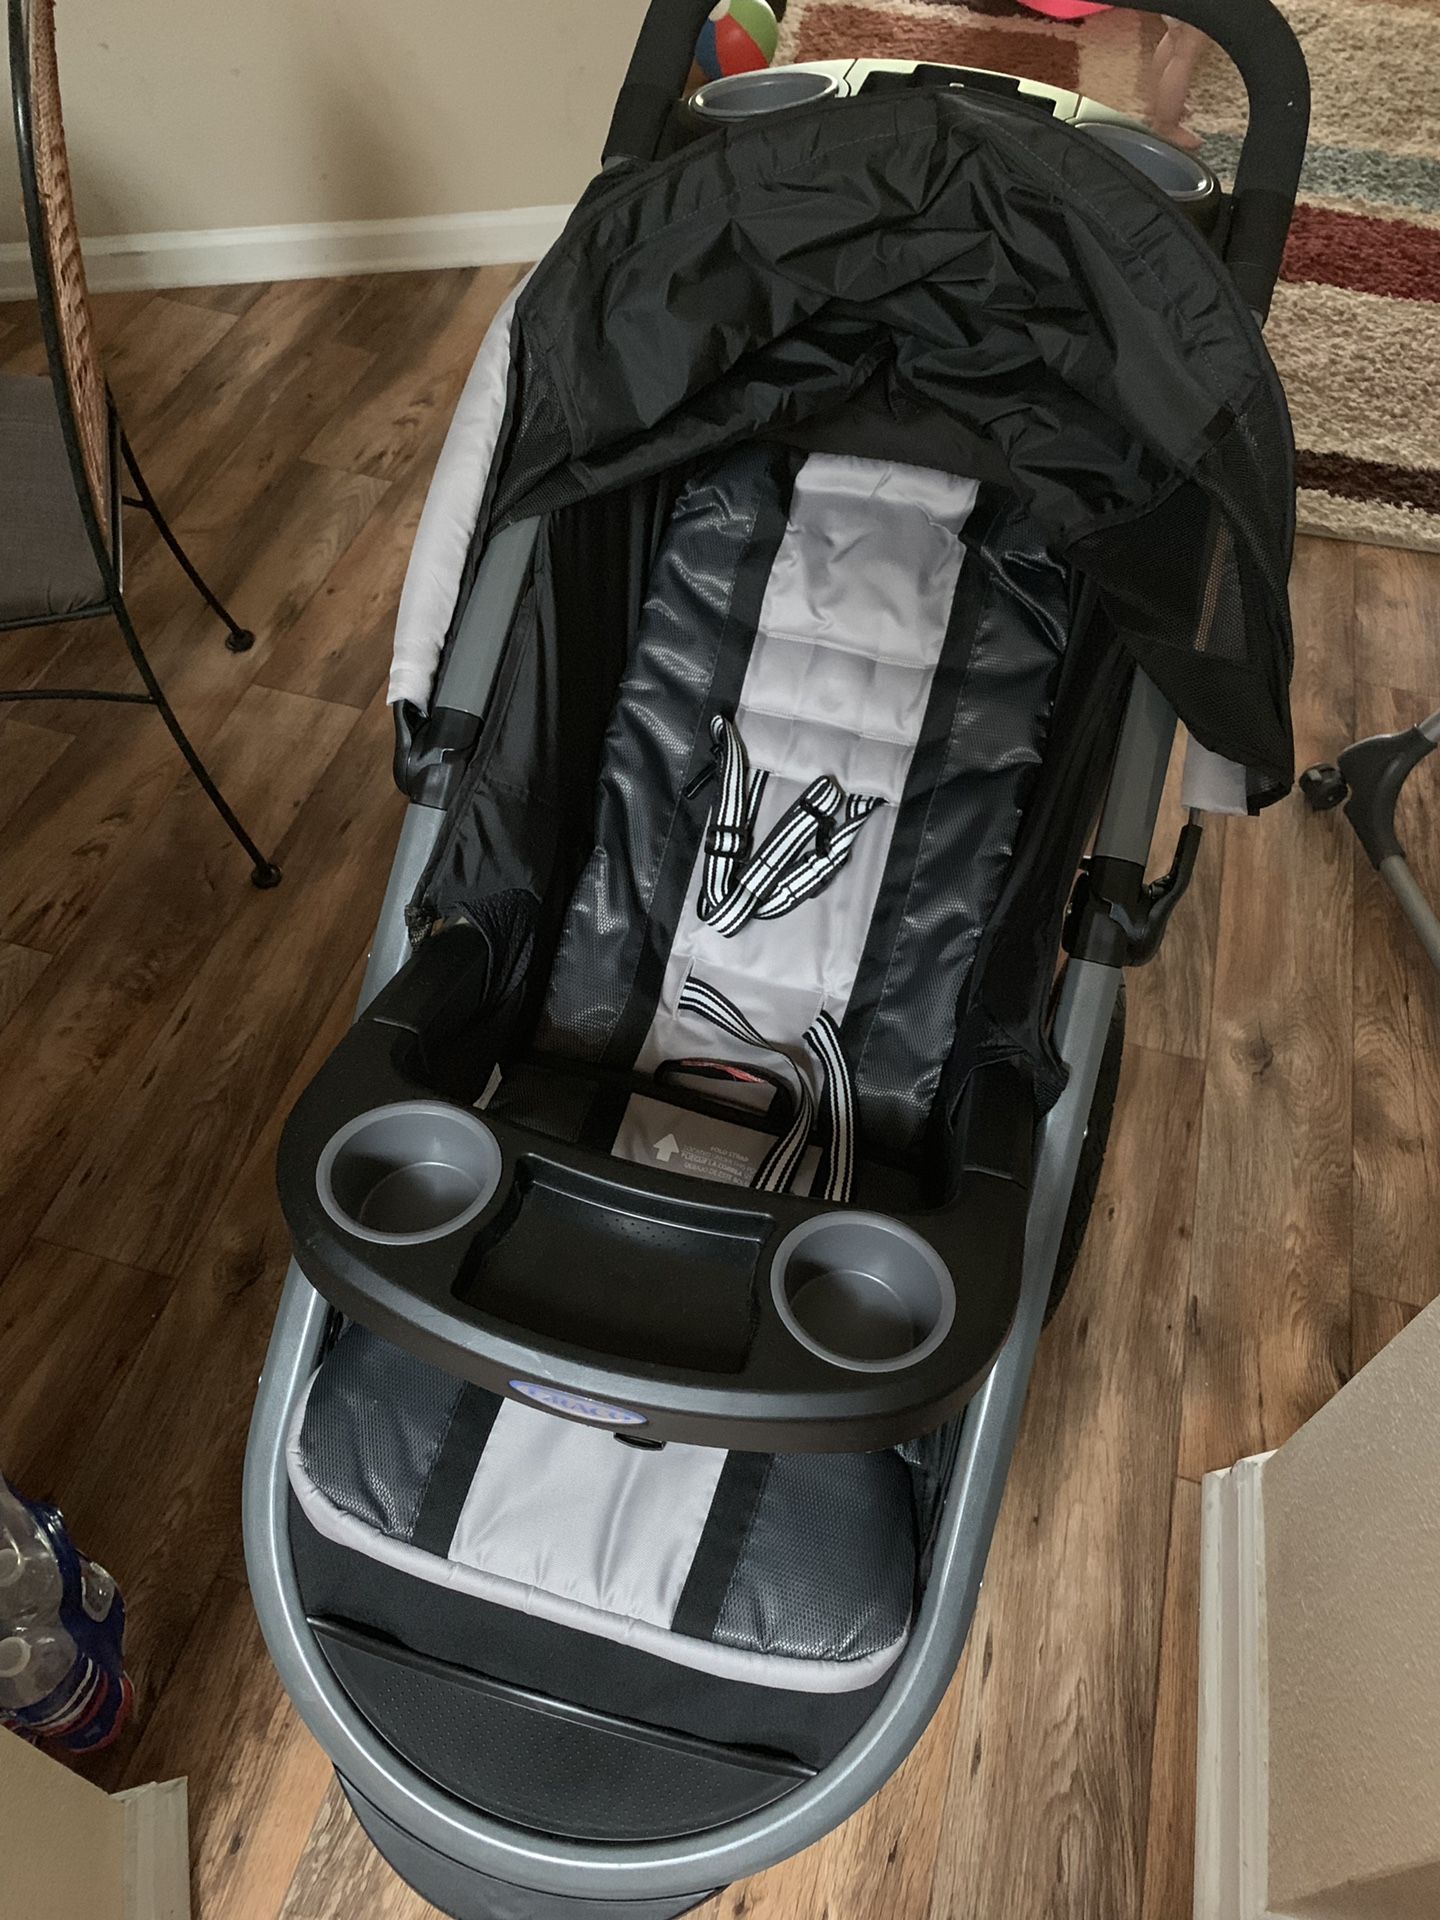 All for $60 Graco running stroller and car seat